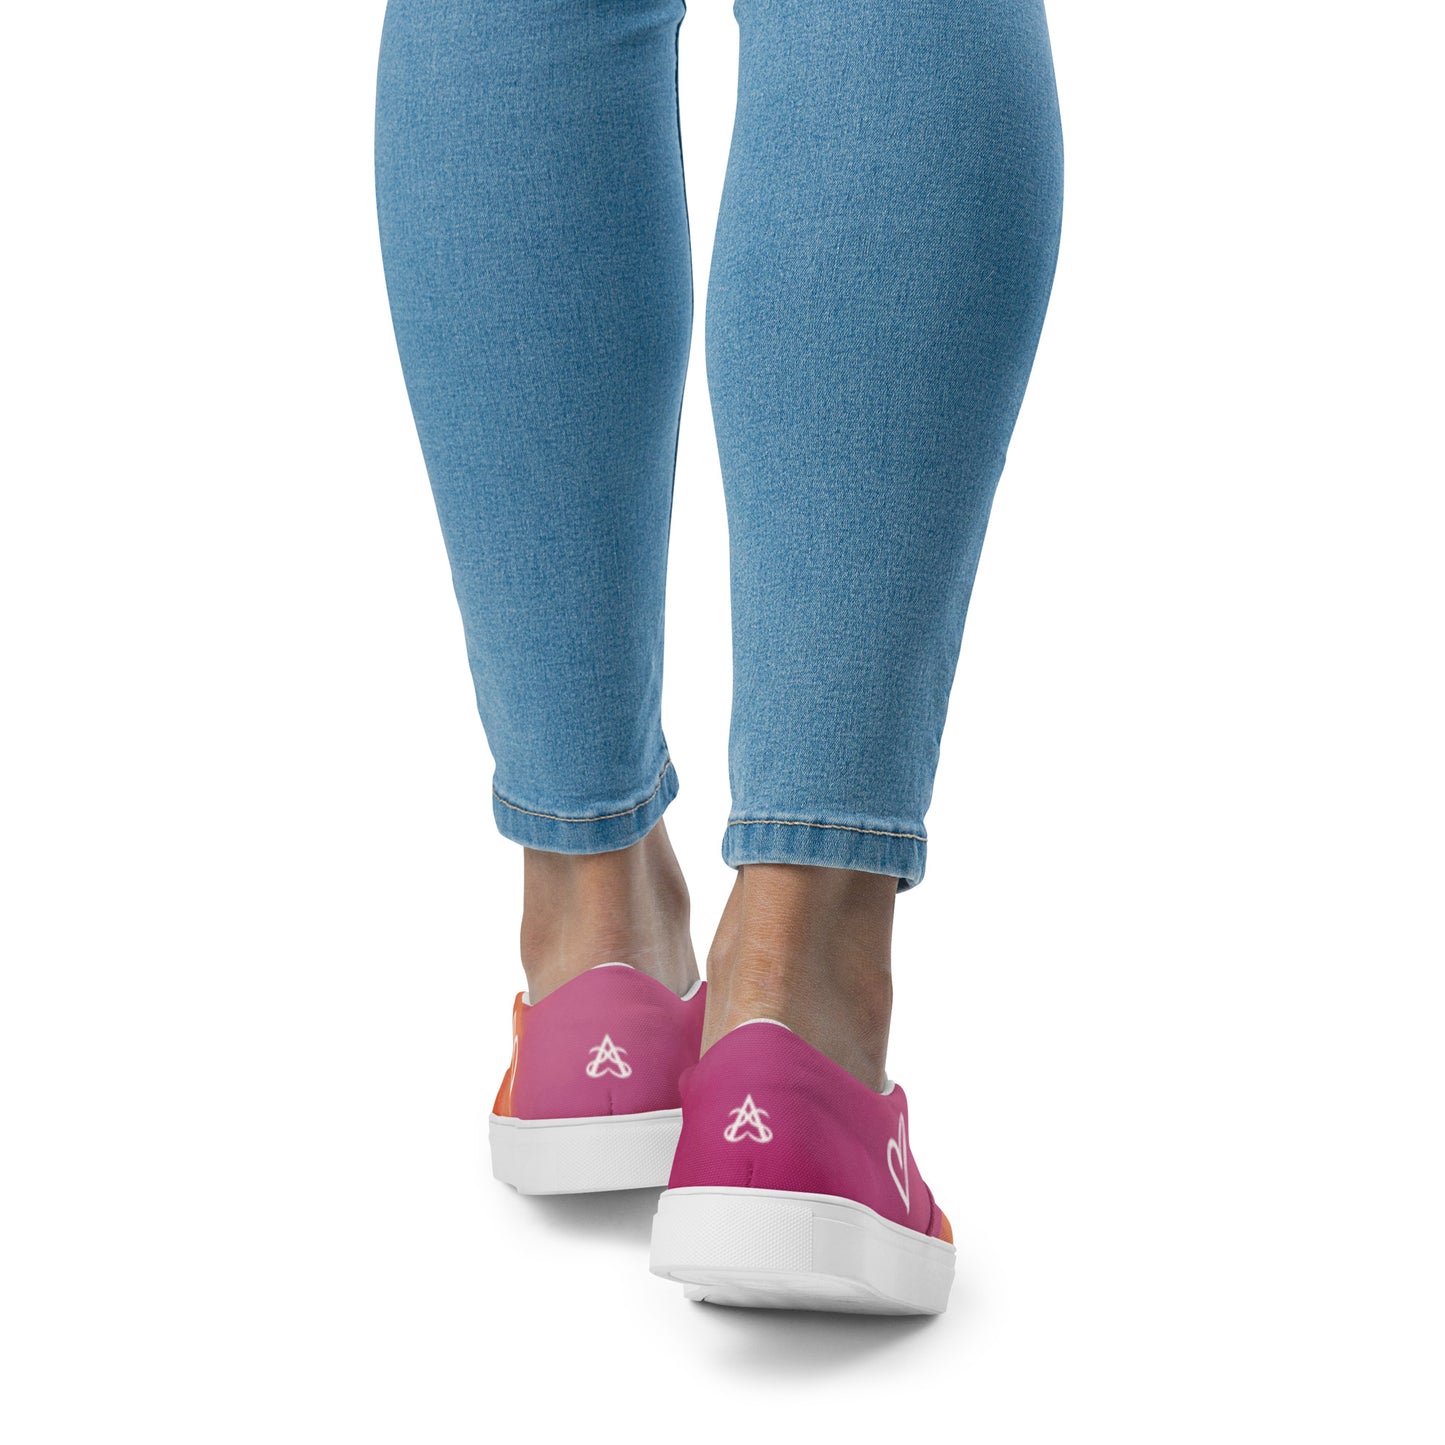 Back view: A model wears a pair of slip on canvas shoes with the colors of the lesbian pride flag in a cloudy texture, a white heart on the side, and the Aras Sivad logo on the back.